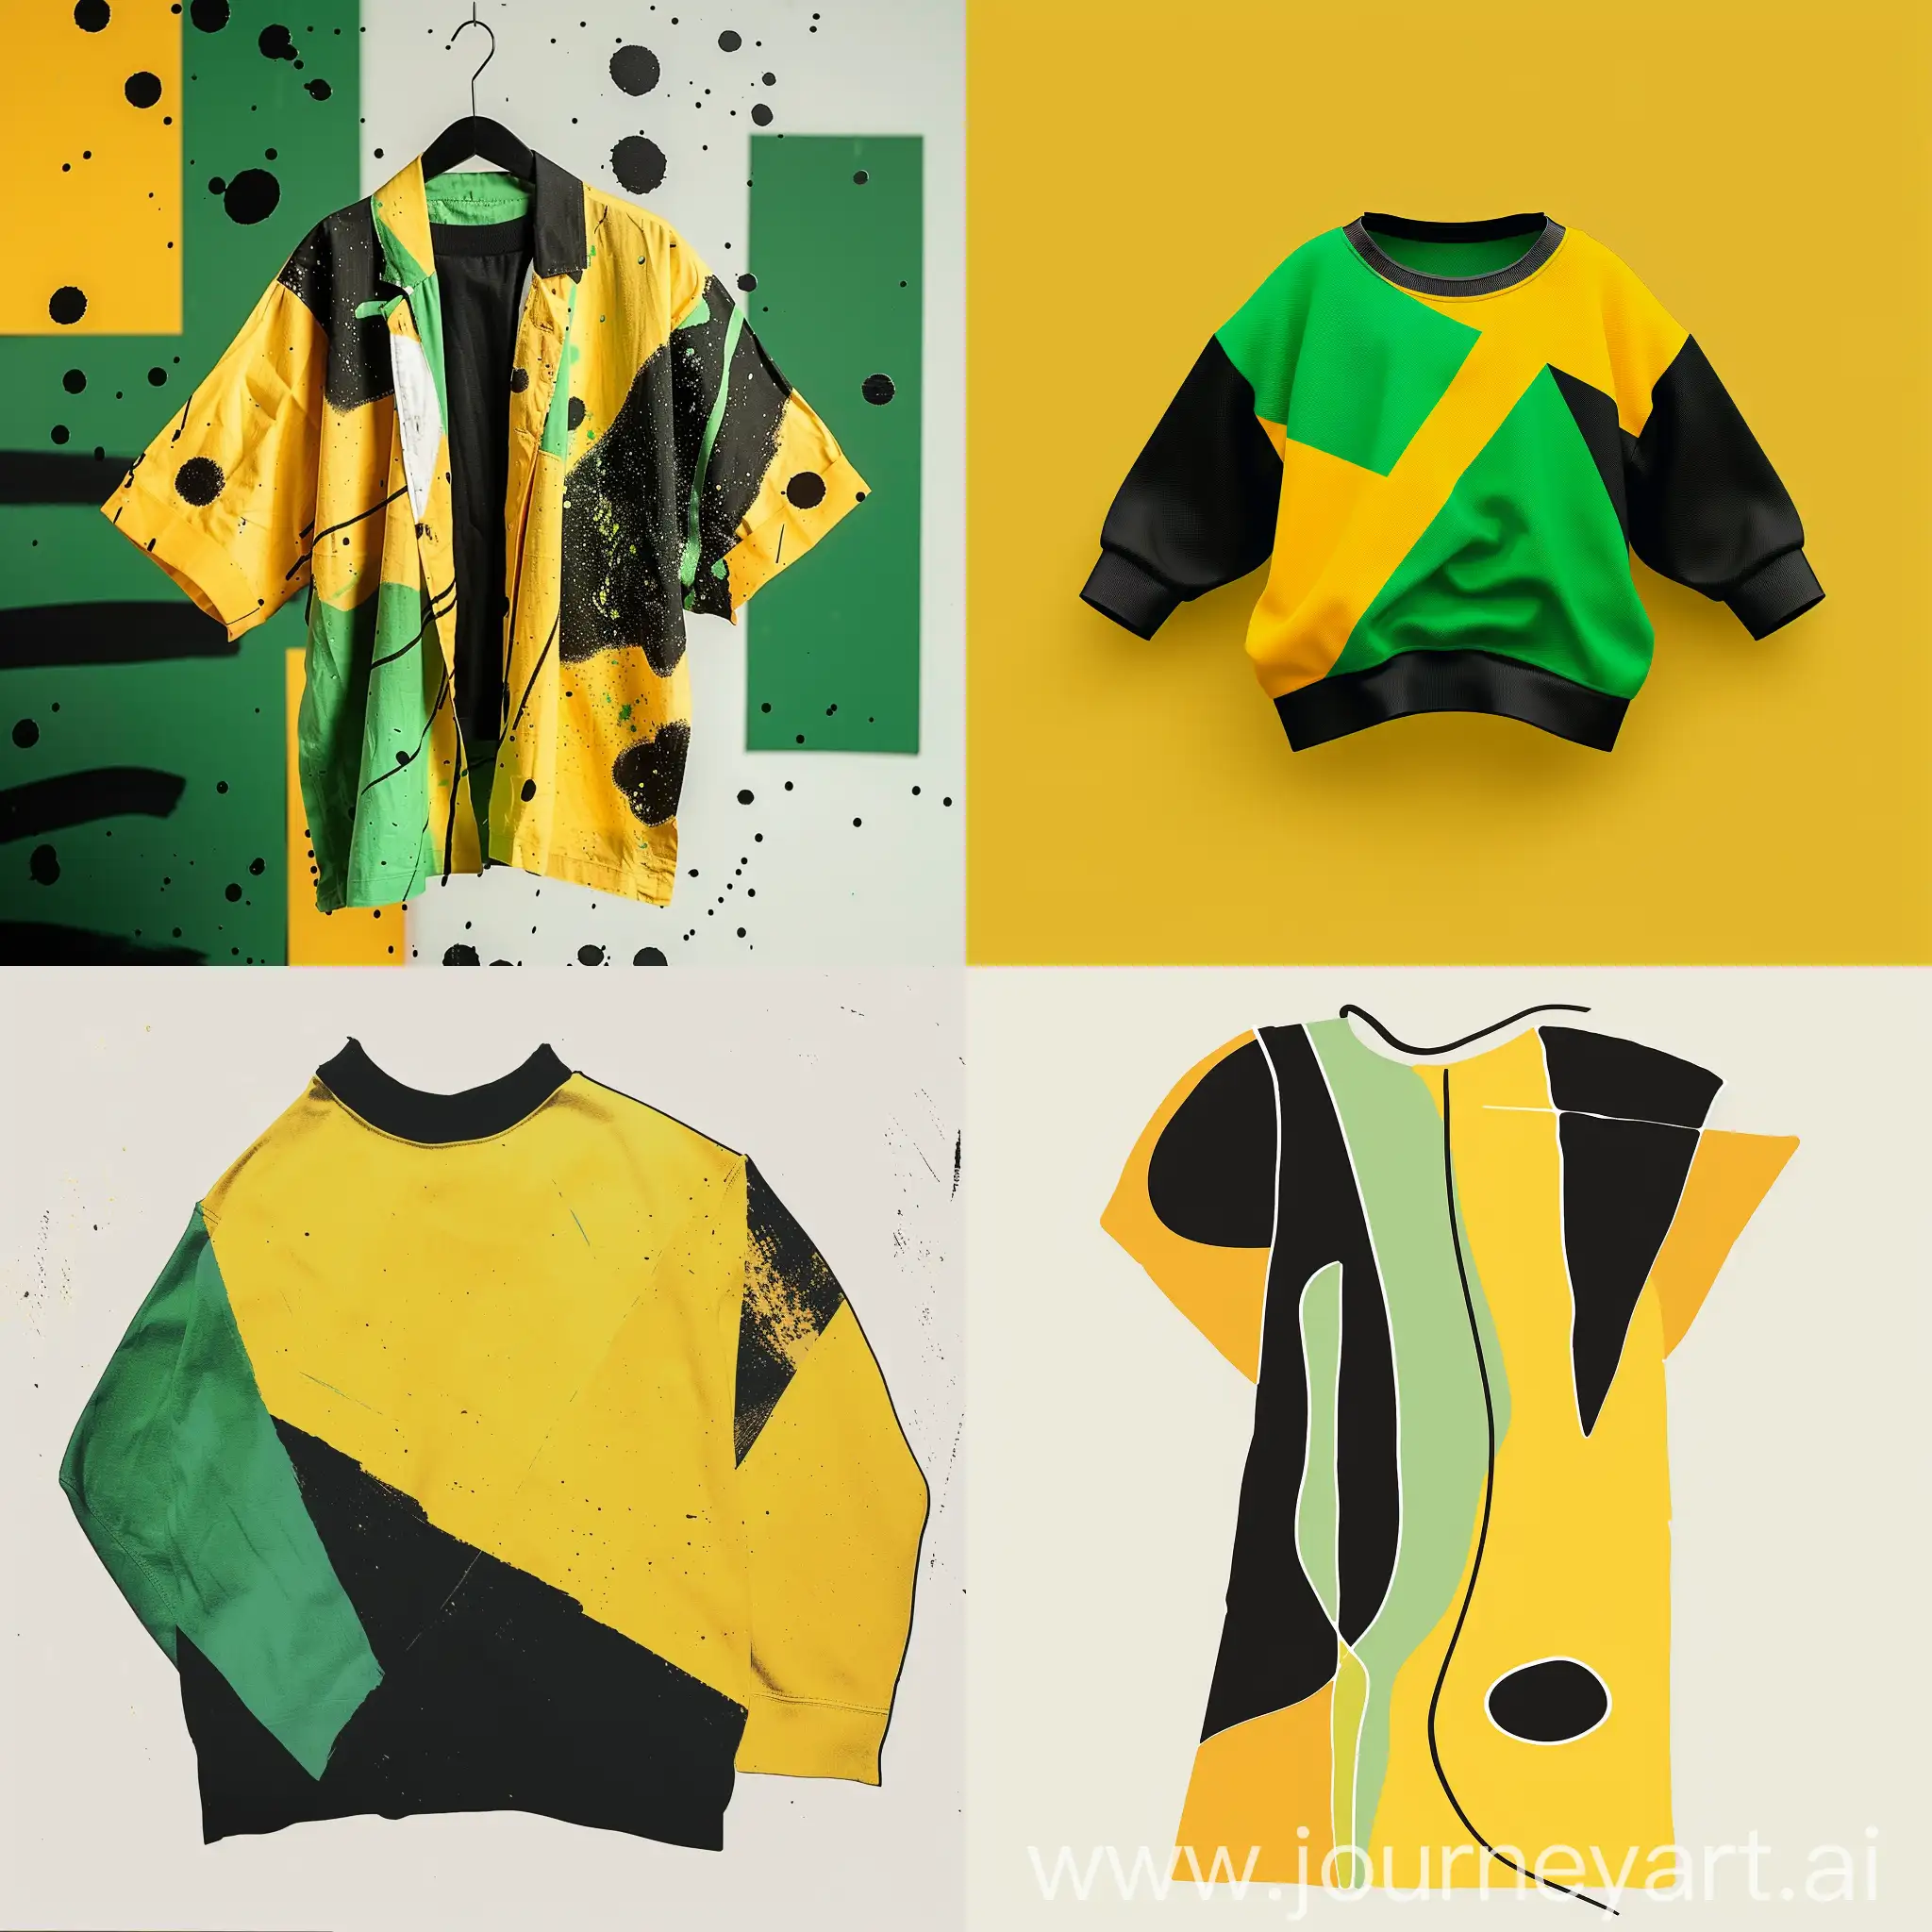 Hopeful-Clothing-Design-in-Yellow-Black-and-Green-for-Abused-Children